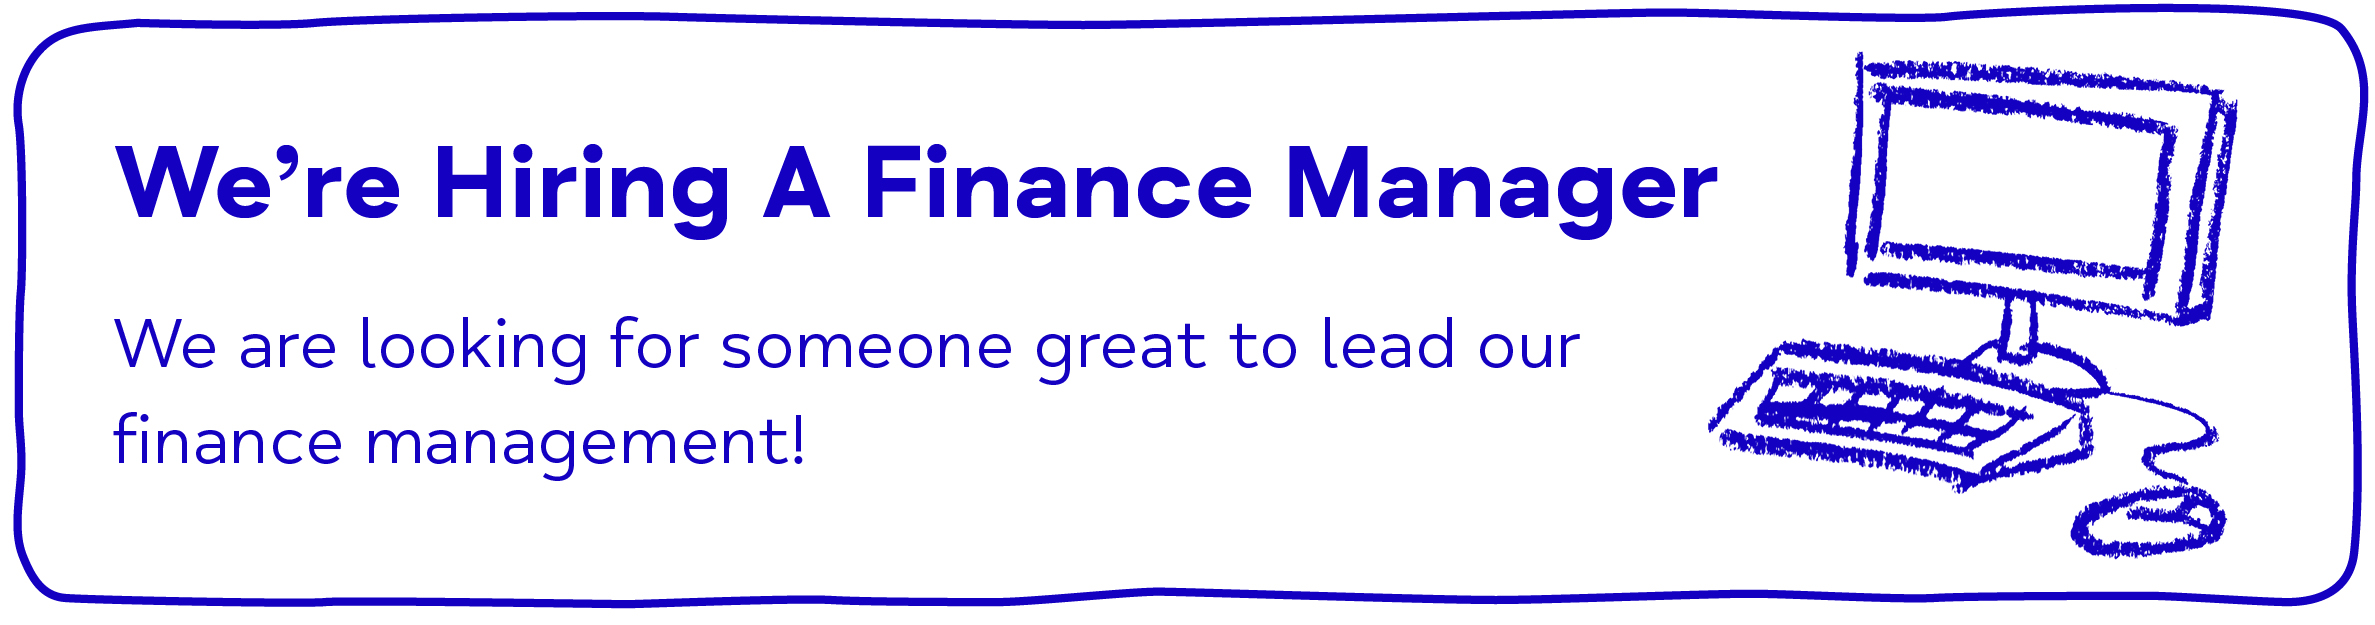 We’re Hiring A Finance Manager We are looking for someone great to lead our finance management!